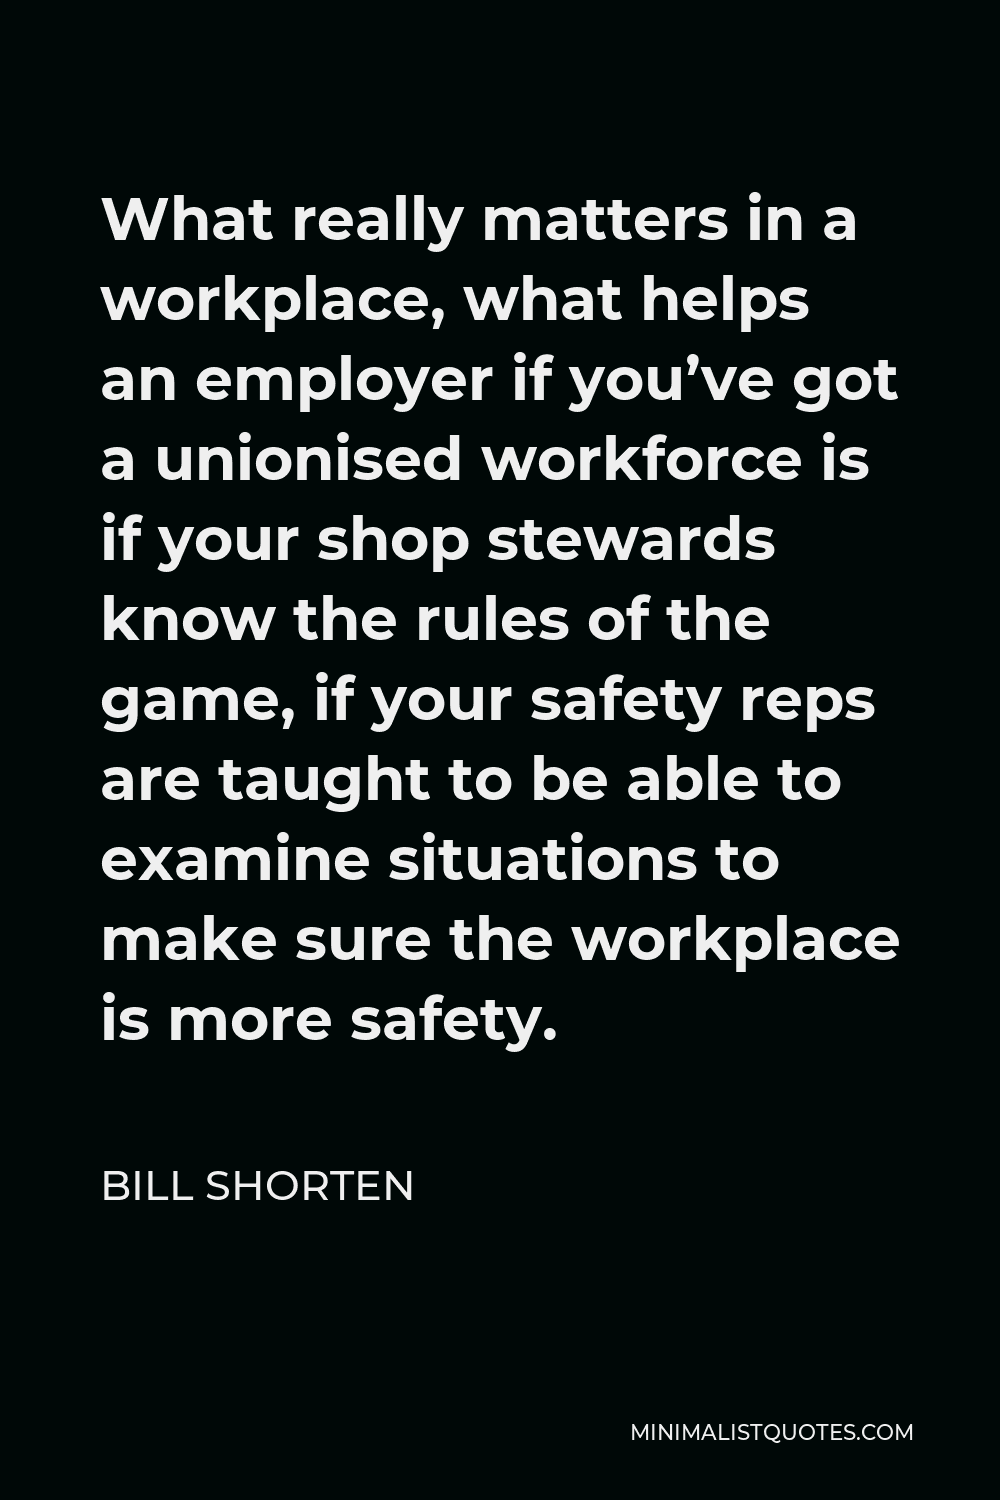 Bill Shorten Quote - What really matters in a workplace, what helps an employer if you’ve got a unionised workforce is if your shop stewards know the rules of the game, if your safety reps are taught to be able to examine situations to make sure the workplace is more safety.